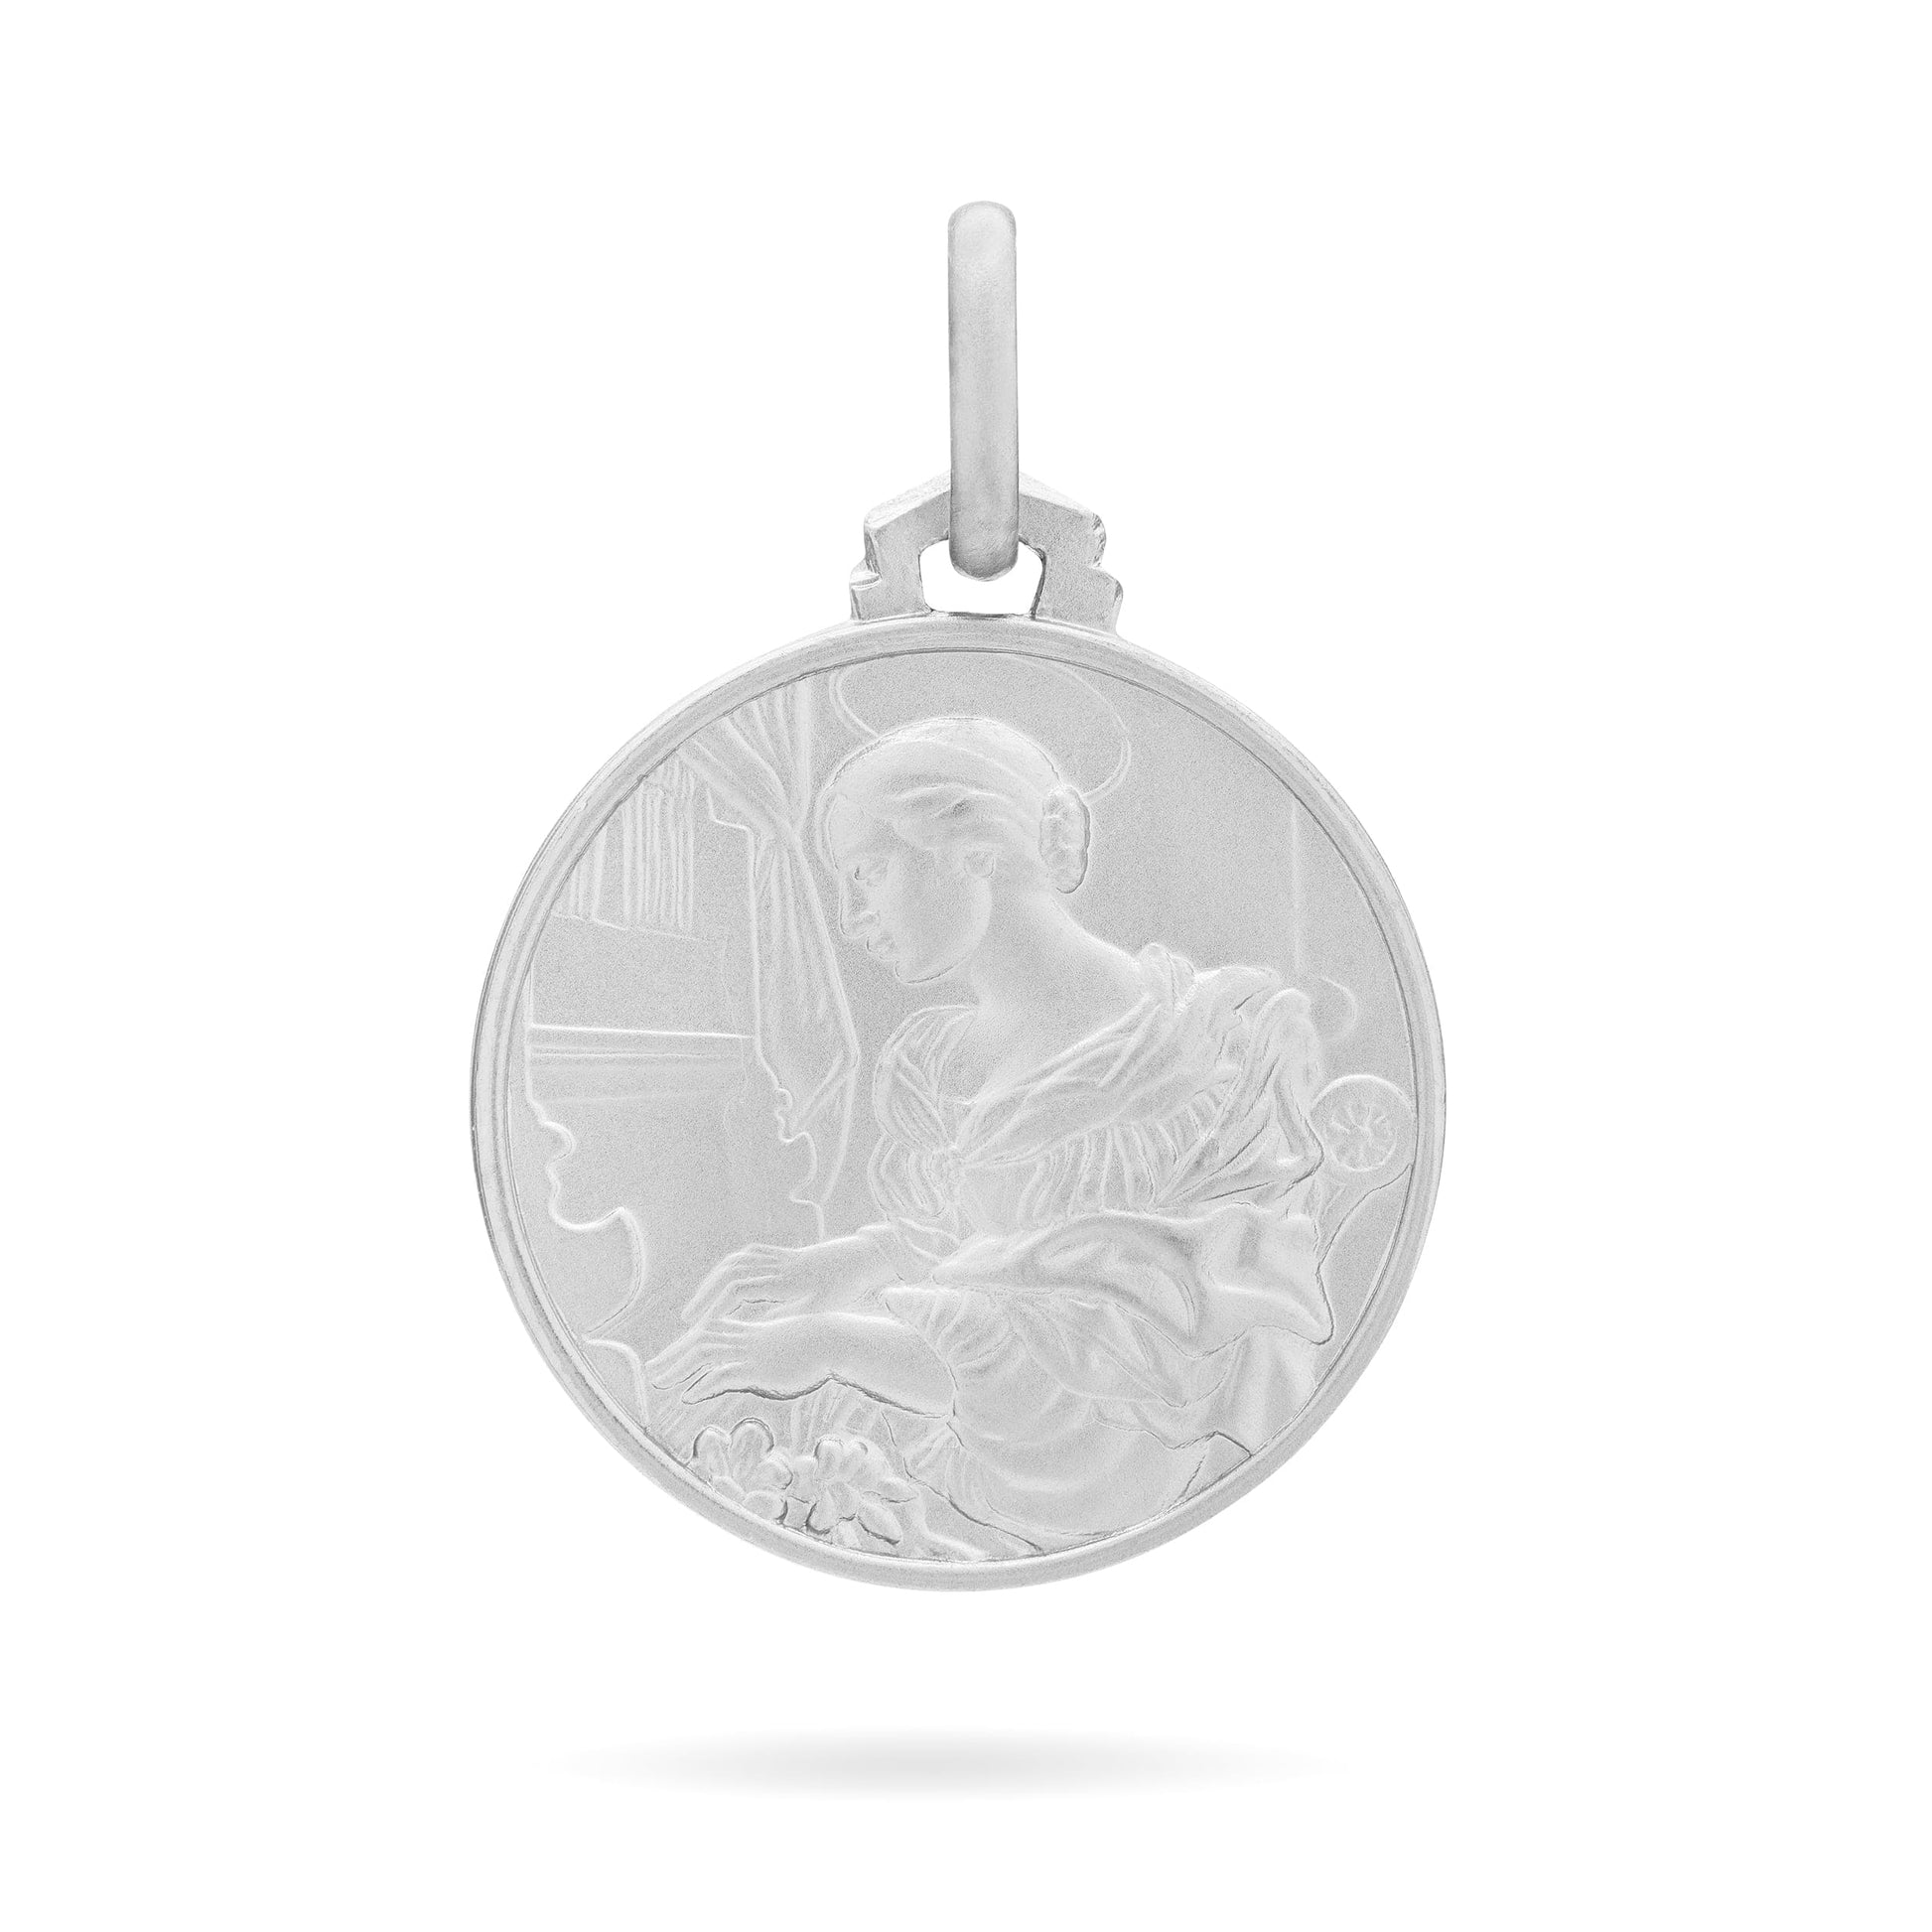 MONDO CATTOLICO Medal 18 mm (0.70 in) Sterling Silver medal of Saint Cecilia